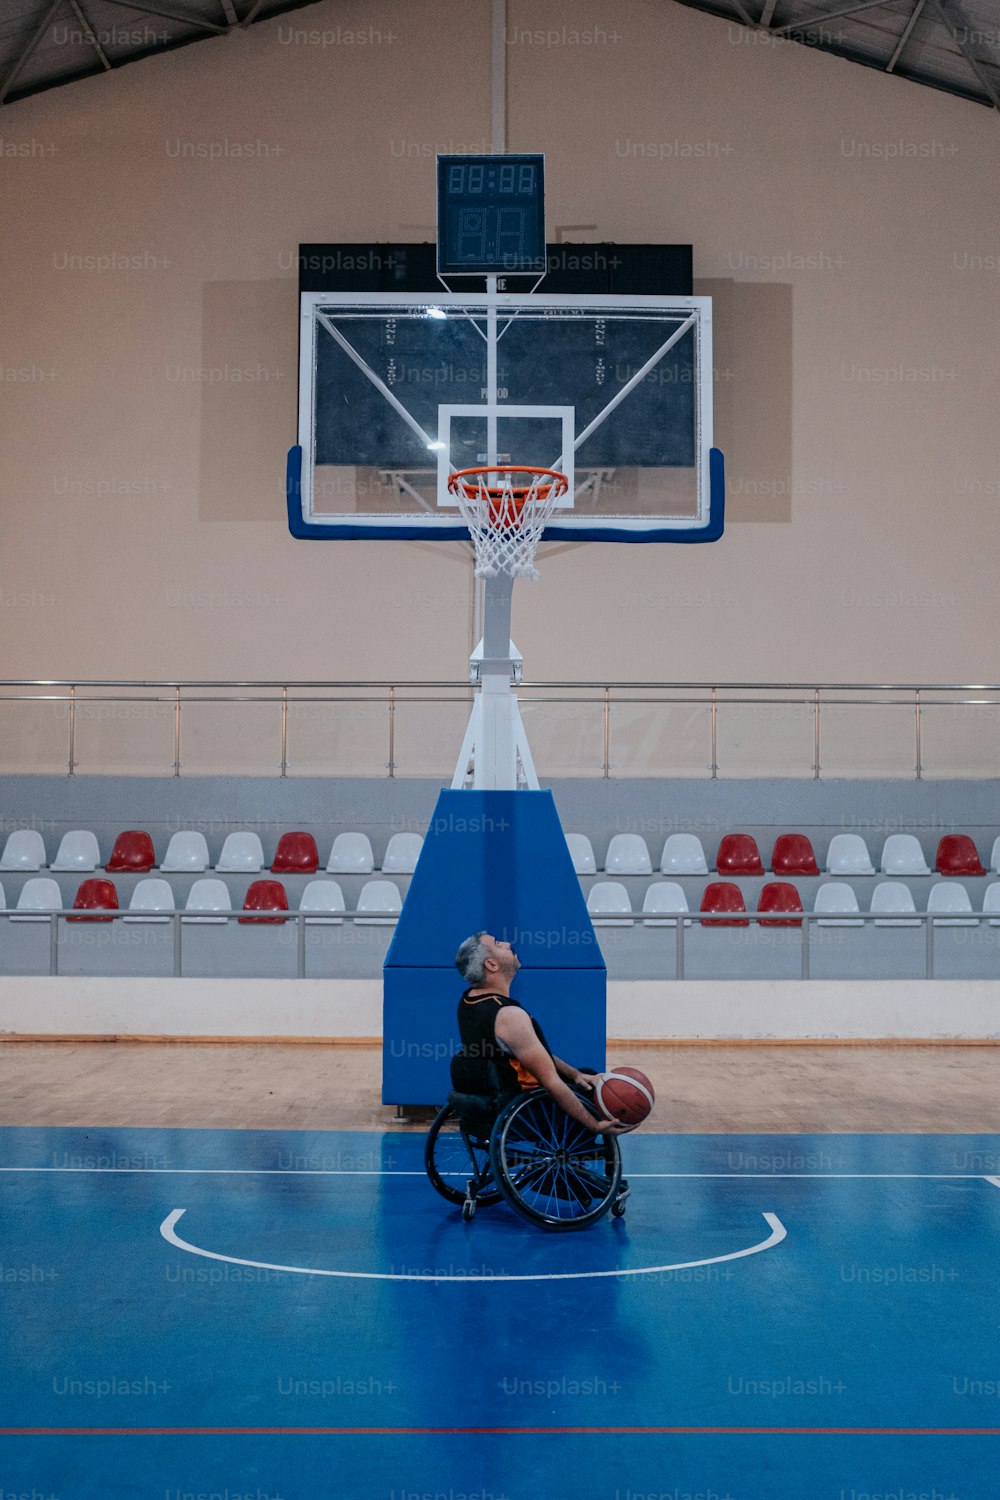 a man in a wheel chair playing basketball